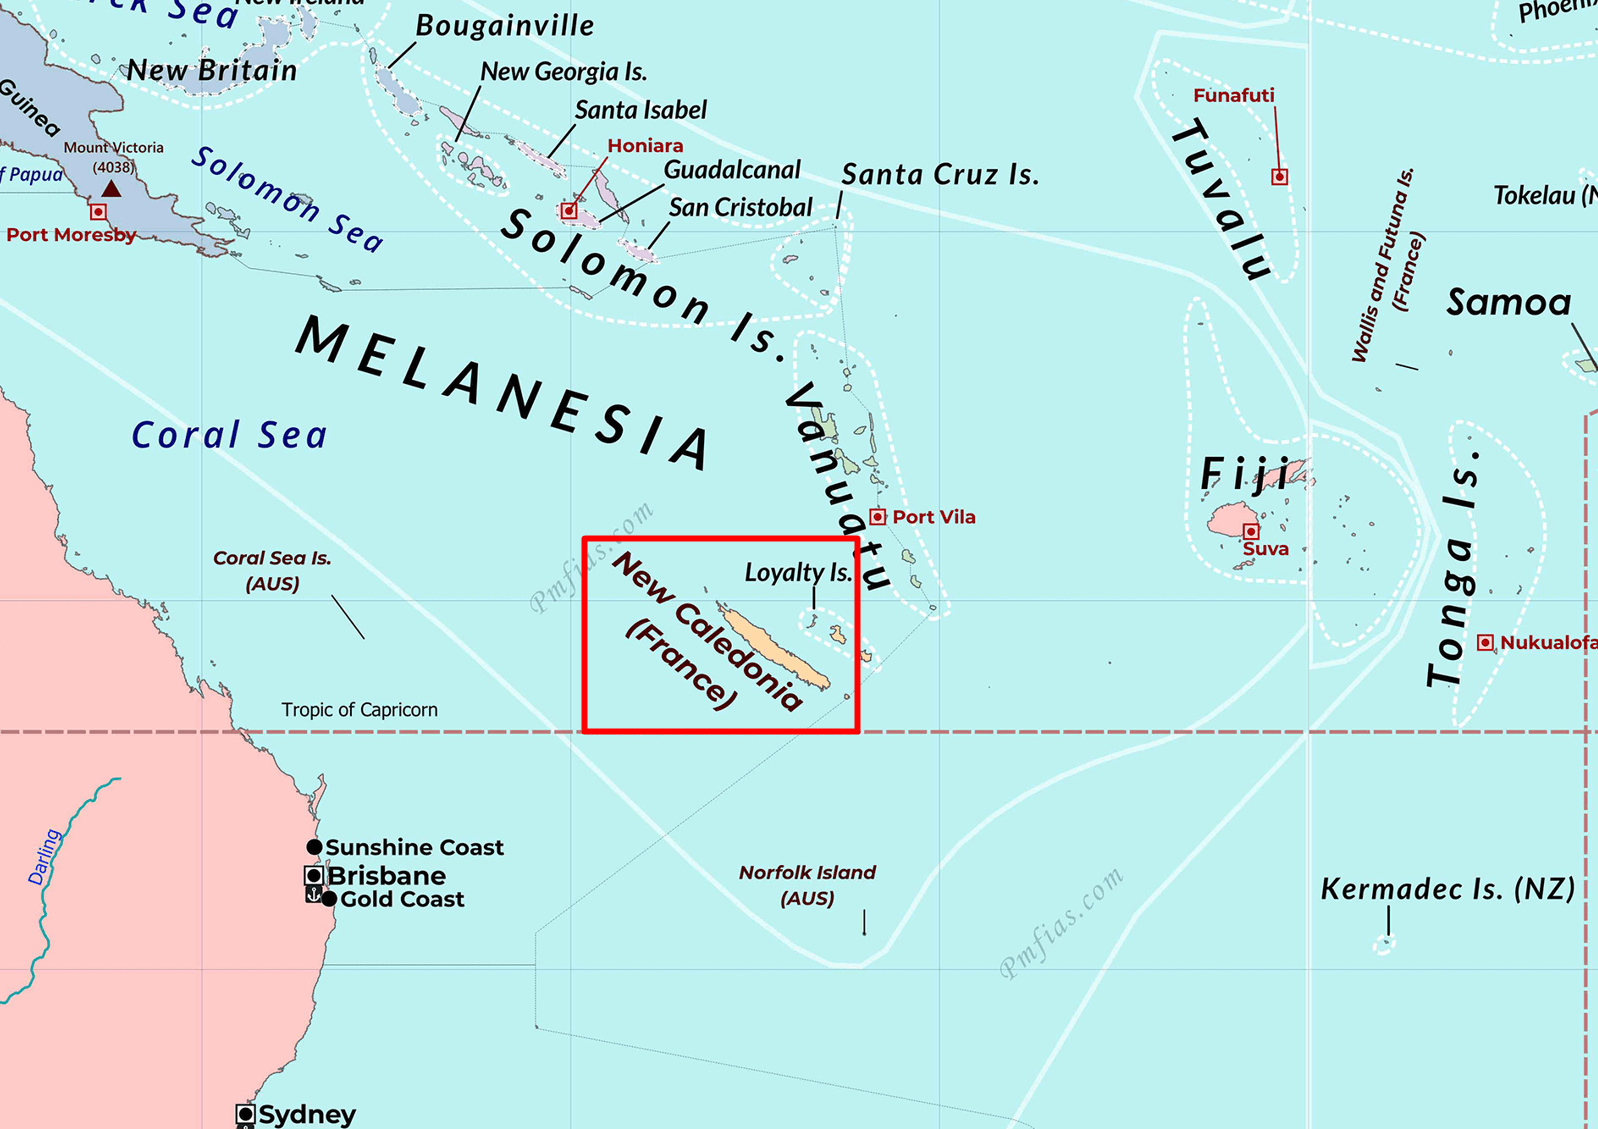 New Caledonia map - PMF IAS